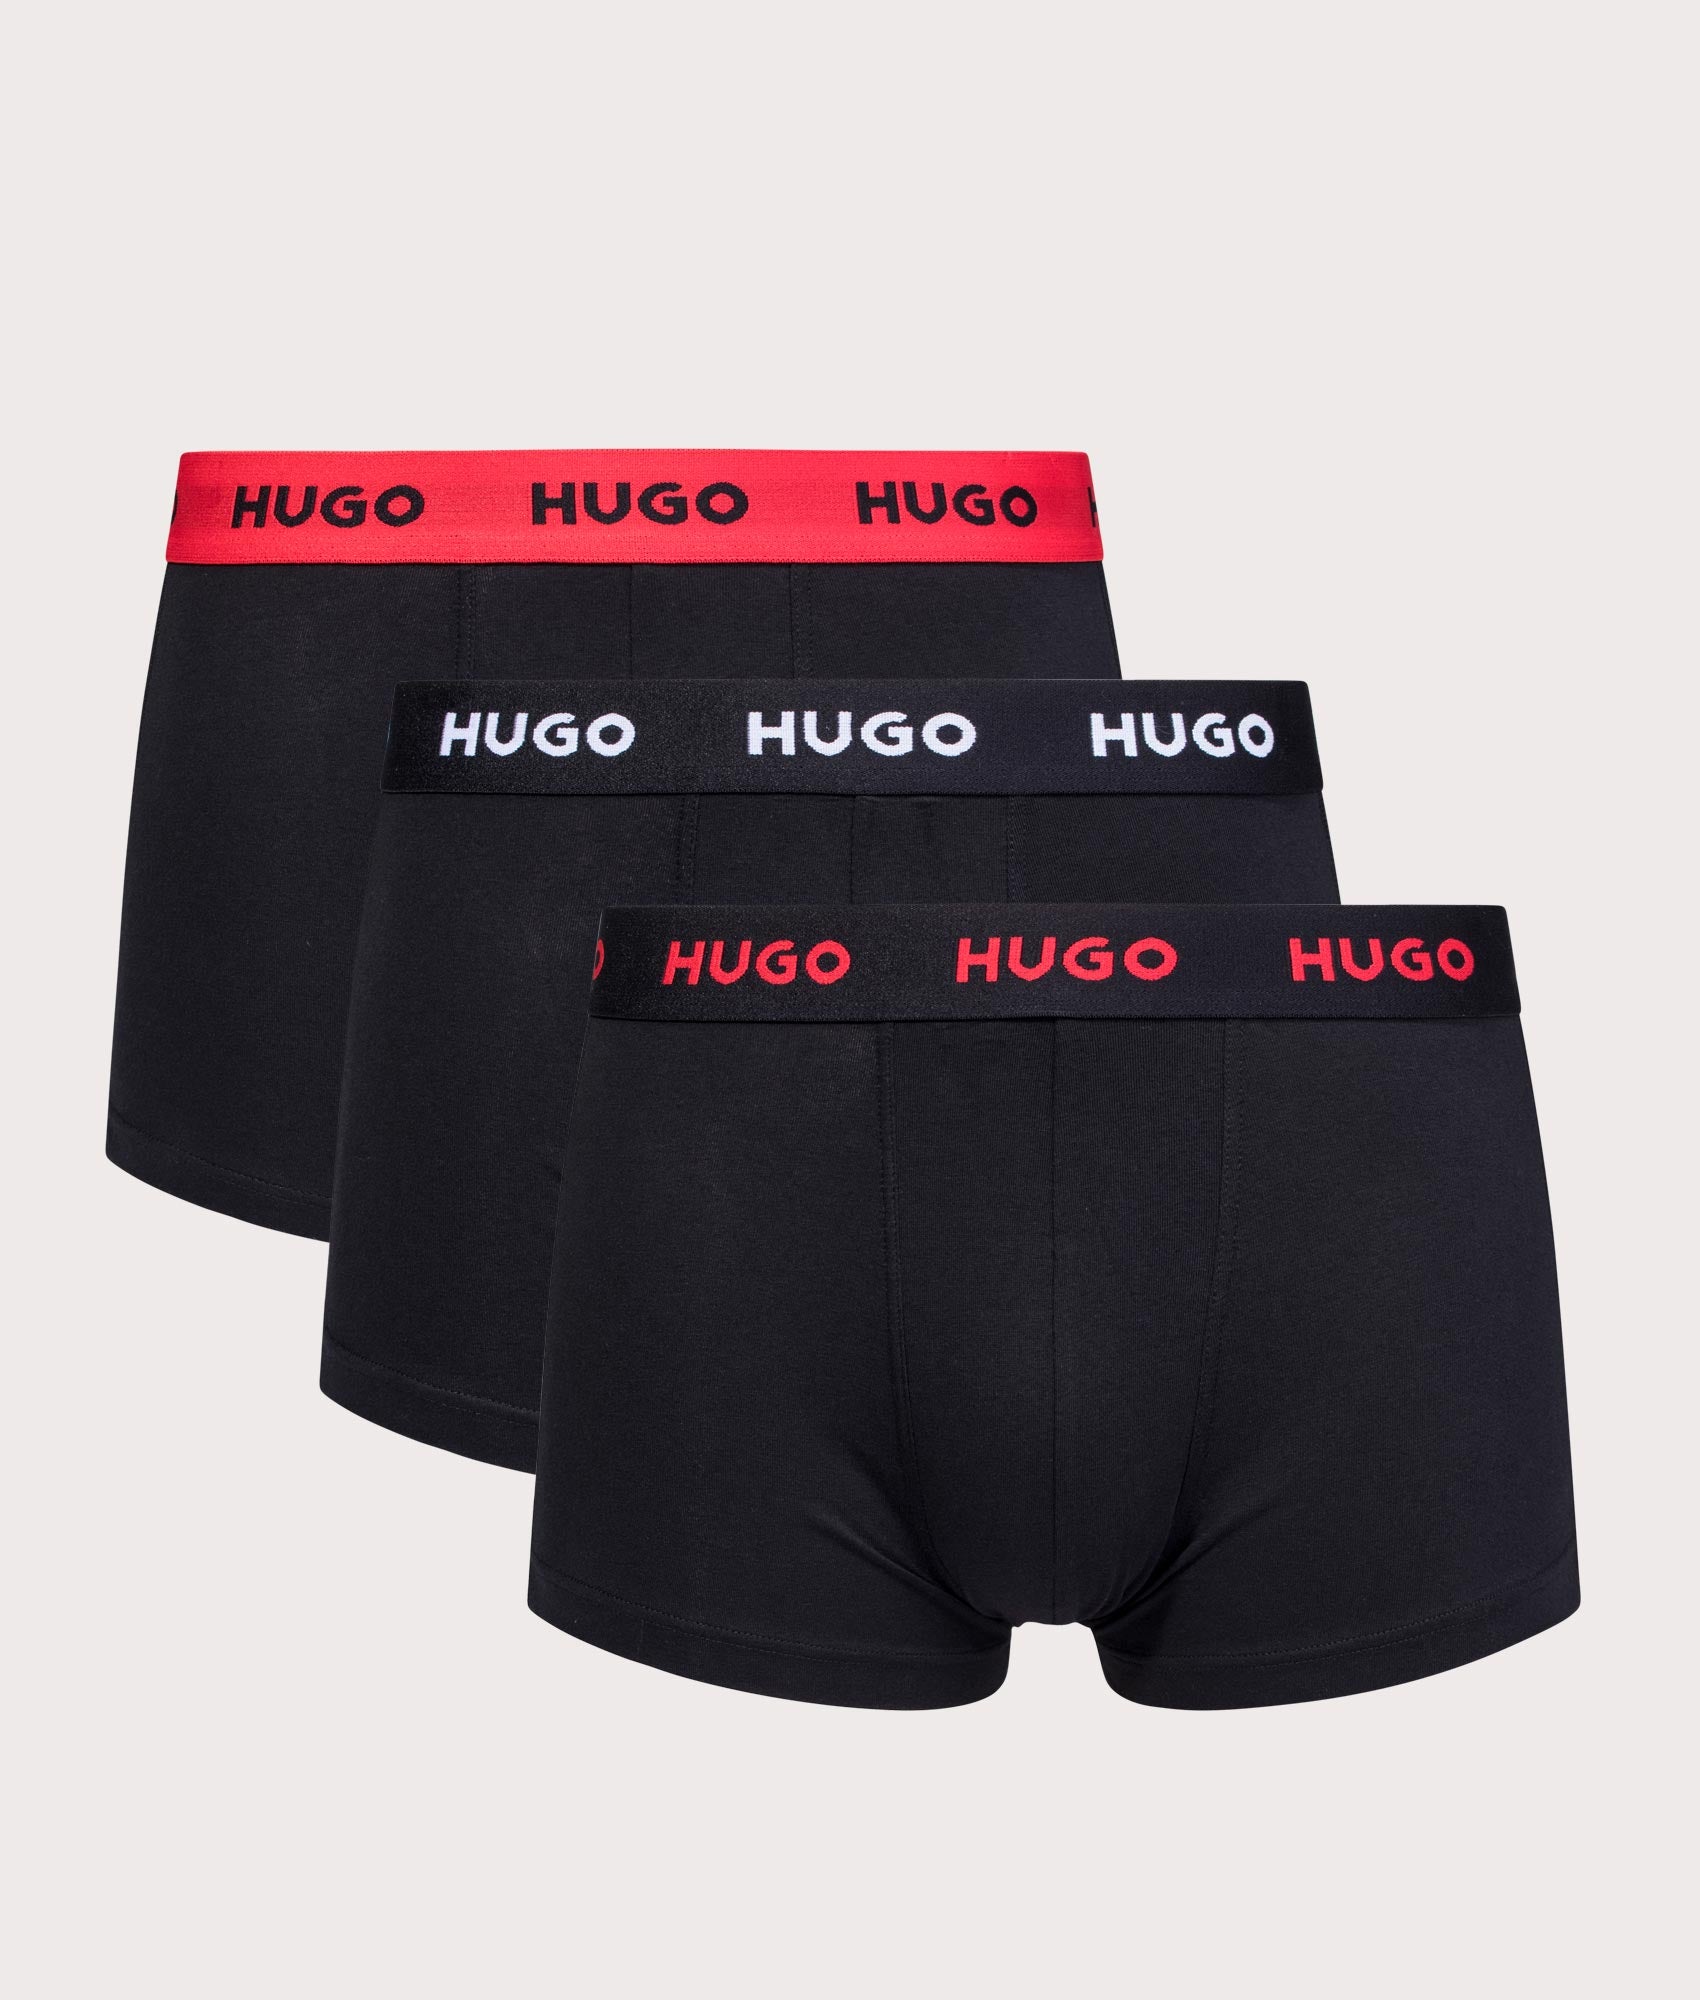 Trunk Triplet Pack Black with Red & White Bands | HUGO | EQVVS